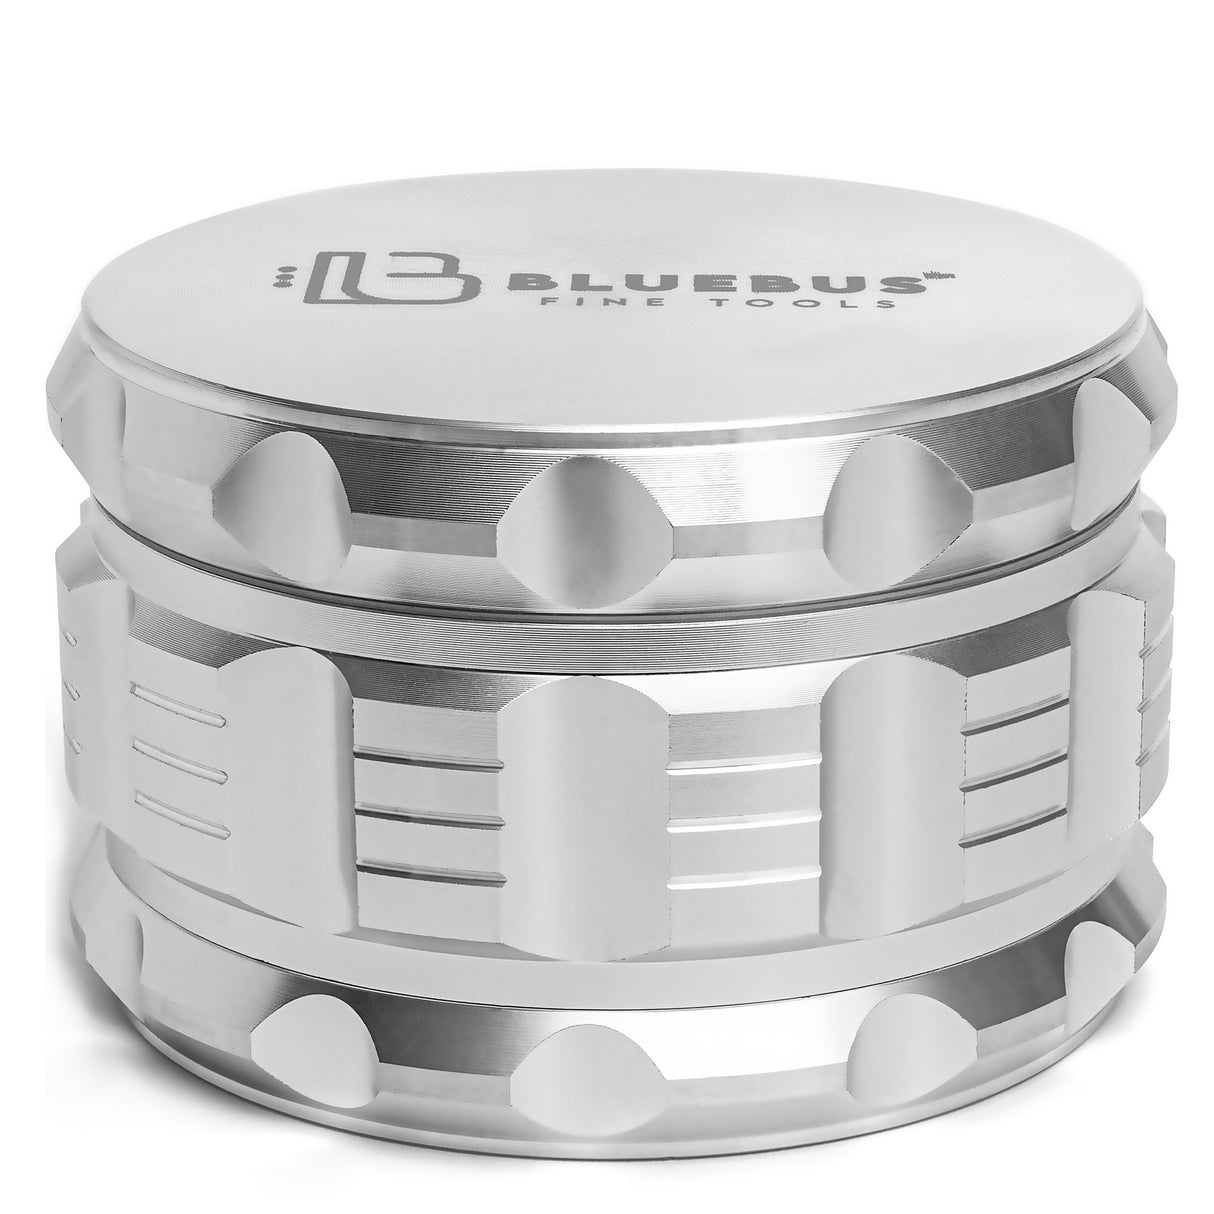 GA Aluminum Grinder by Blue Bus Fine Tools in Silver, 4-Part Design, Front View